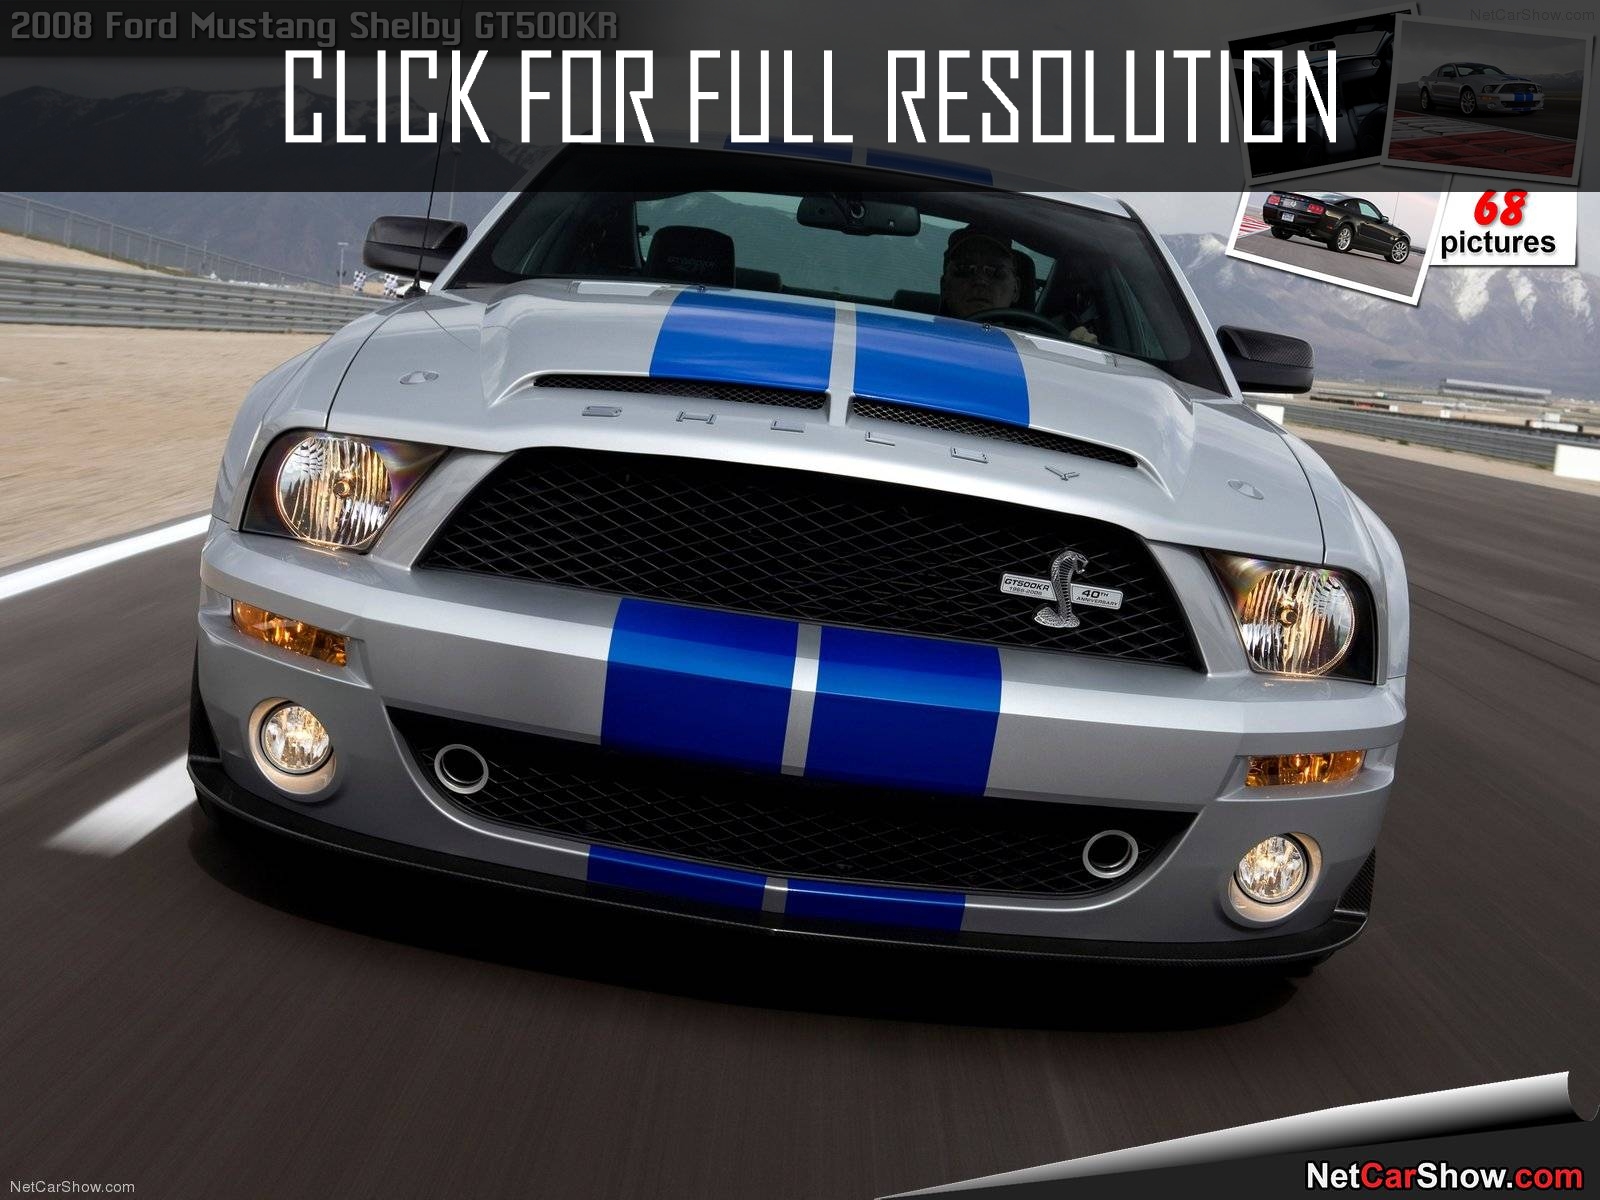 Ford Mustang Shelby GT500kr